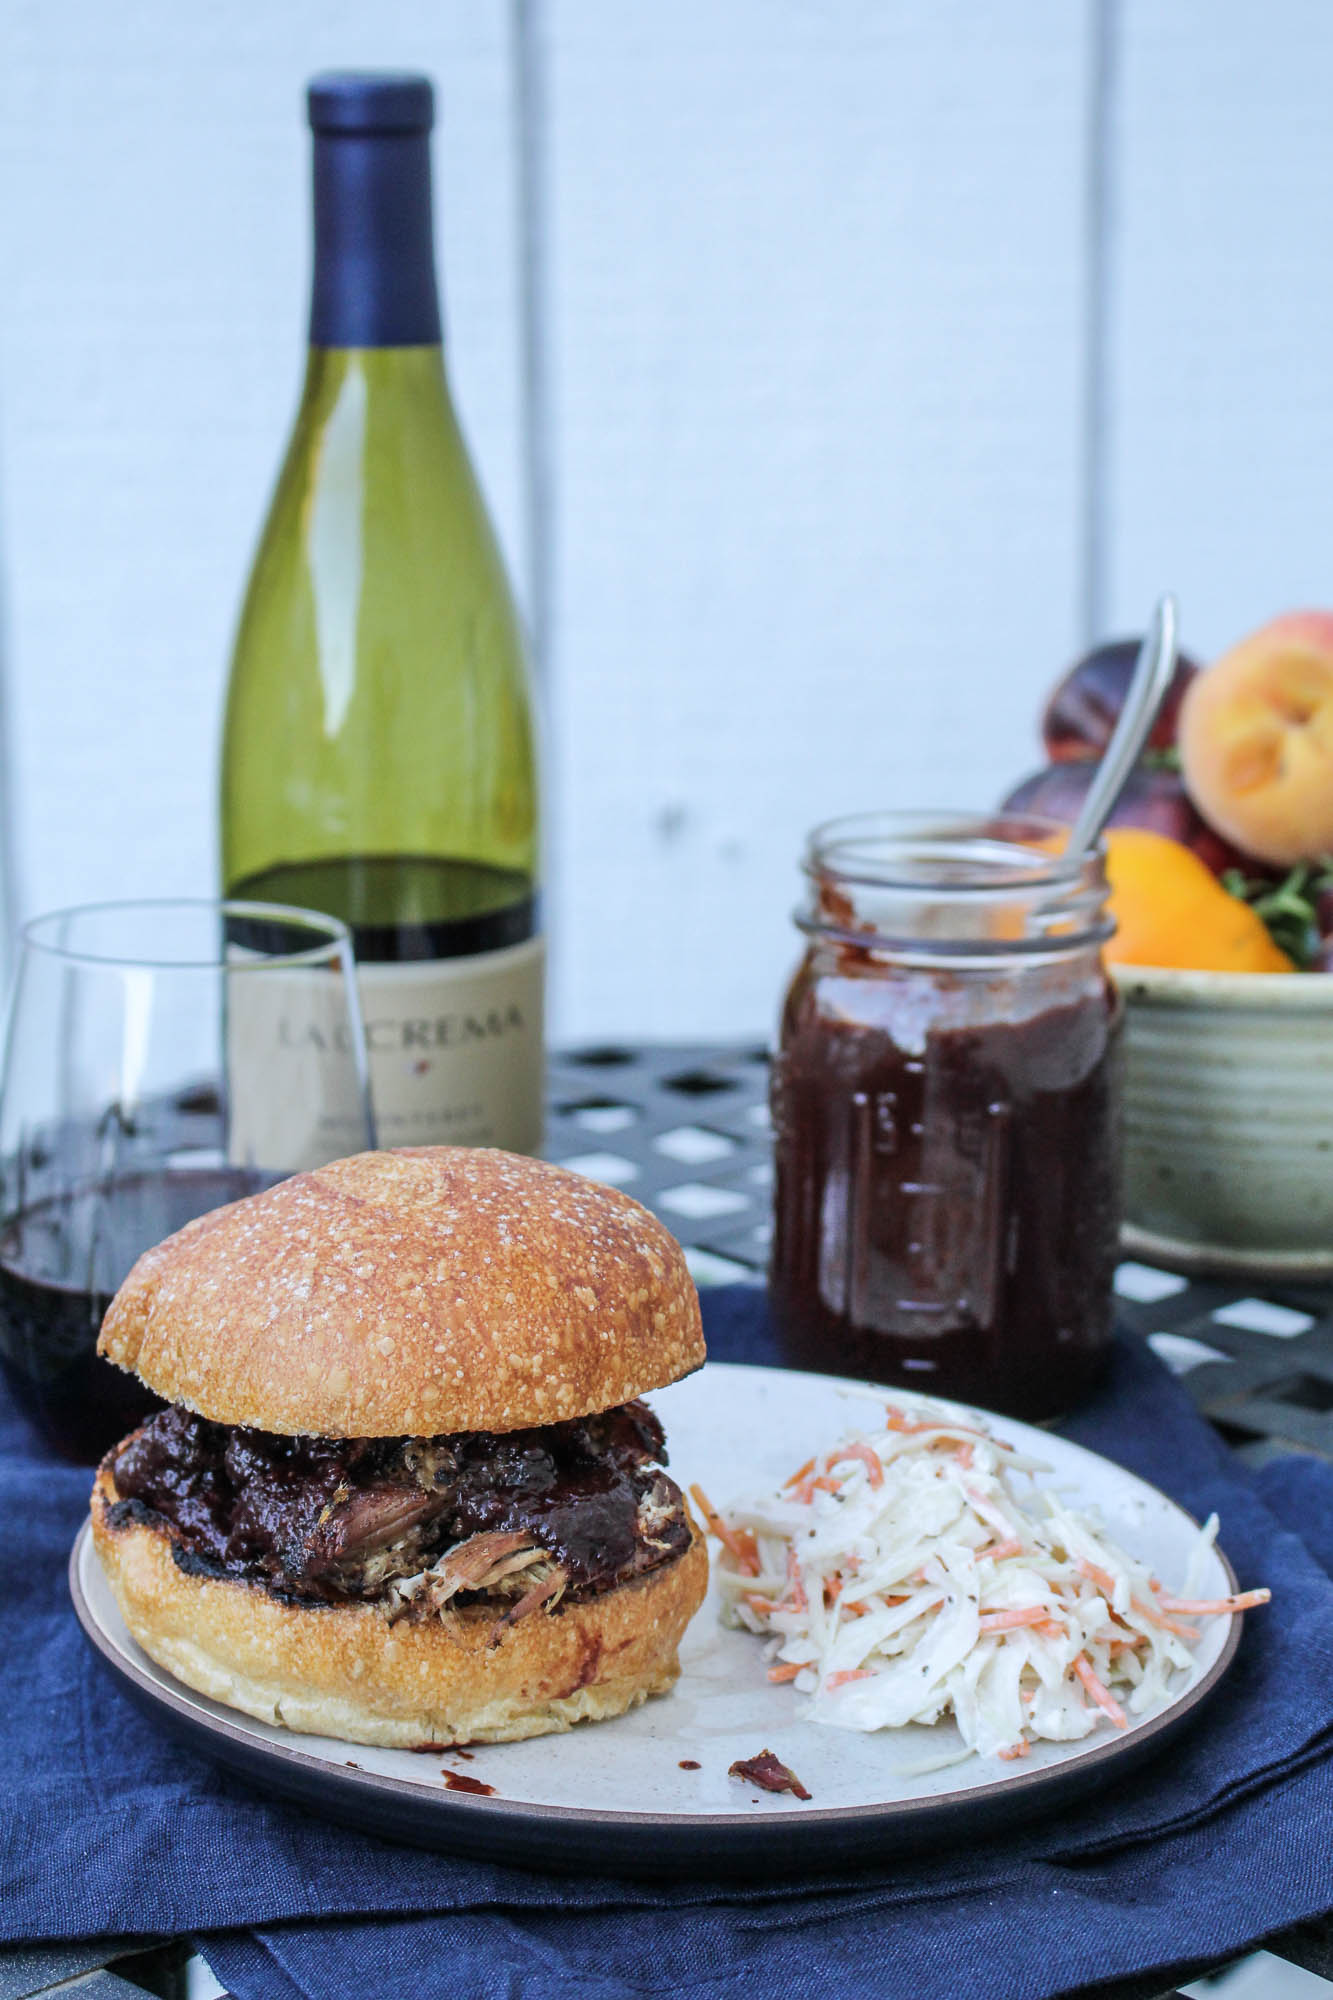 Pulled Pork with Blackberry Pinot BBQ Sauce {Katie at the Kitchen Door} #lacremastyle #spon